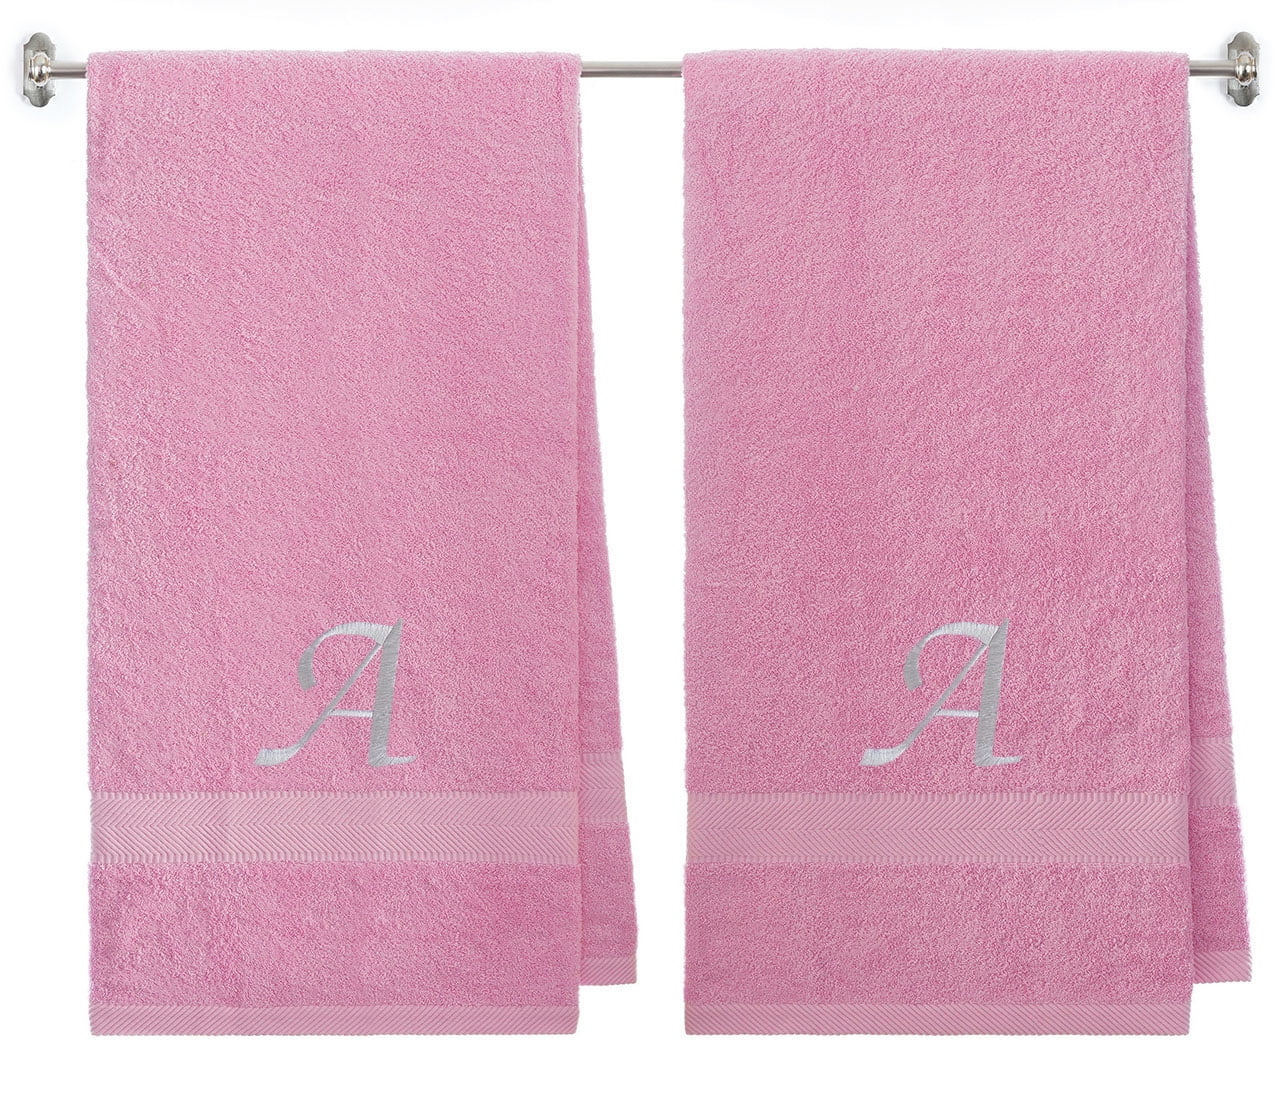 New EMBROIDERED PERSONALISED BATH TOWEL Ideal Gift Set ANY NAME Combet Cotton 